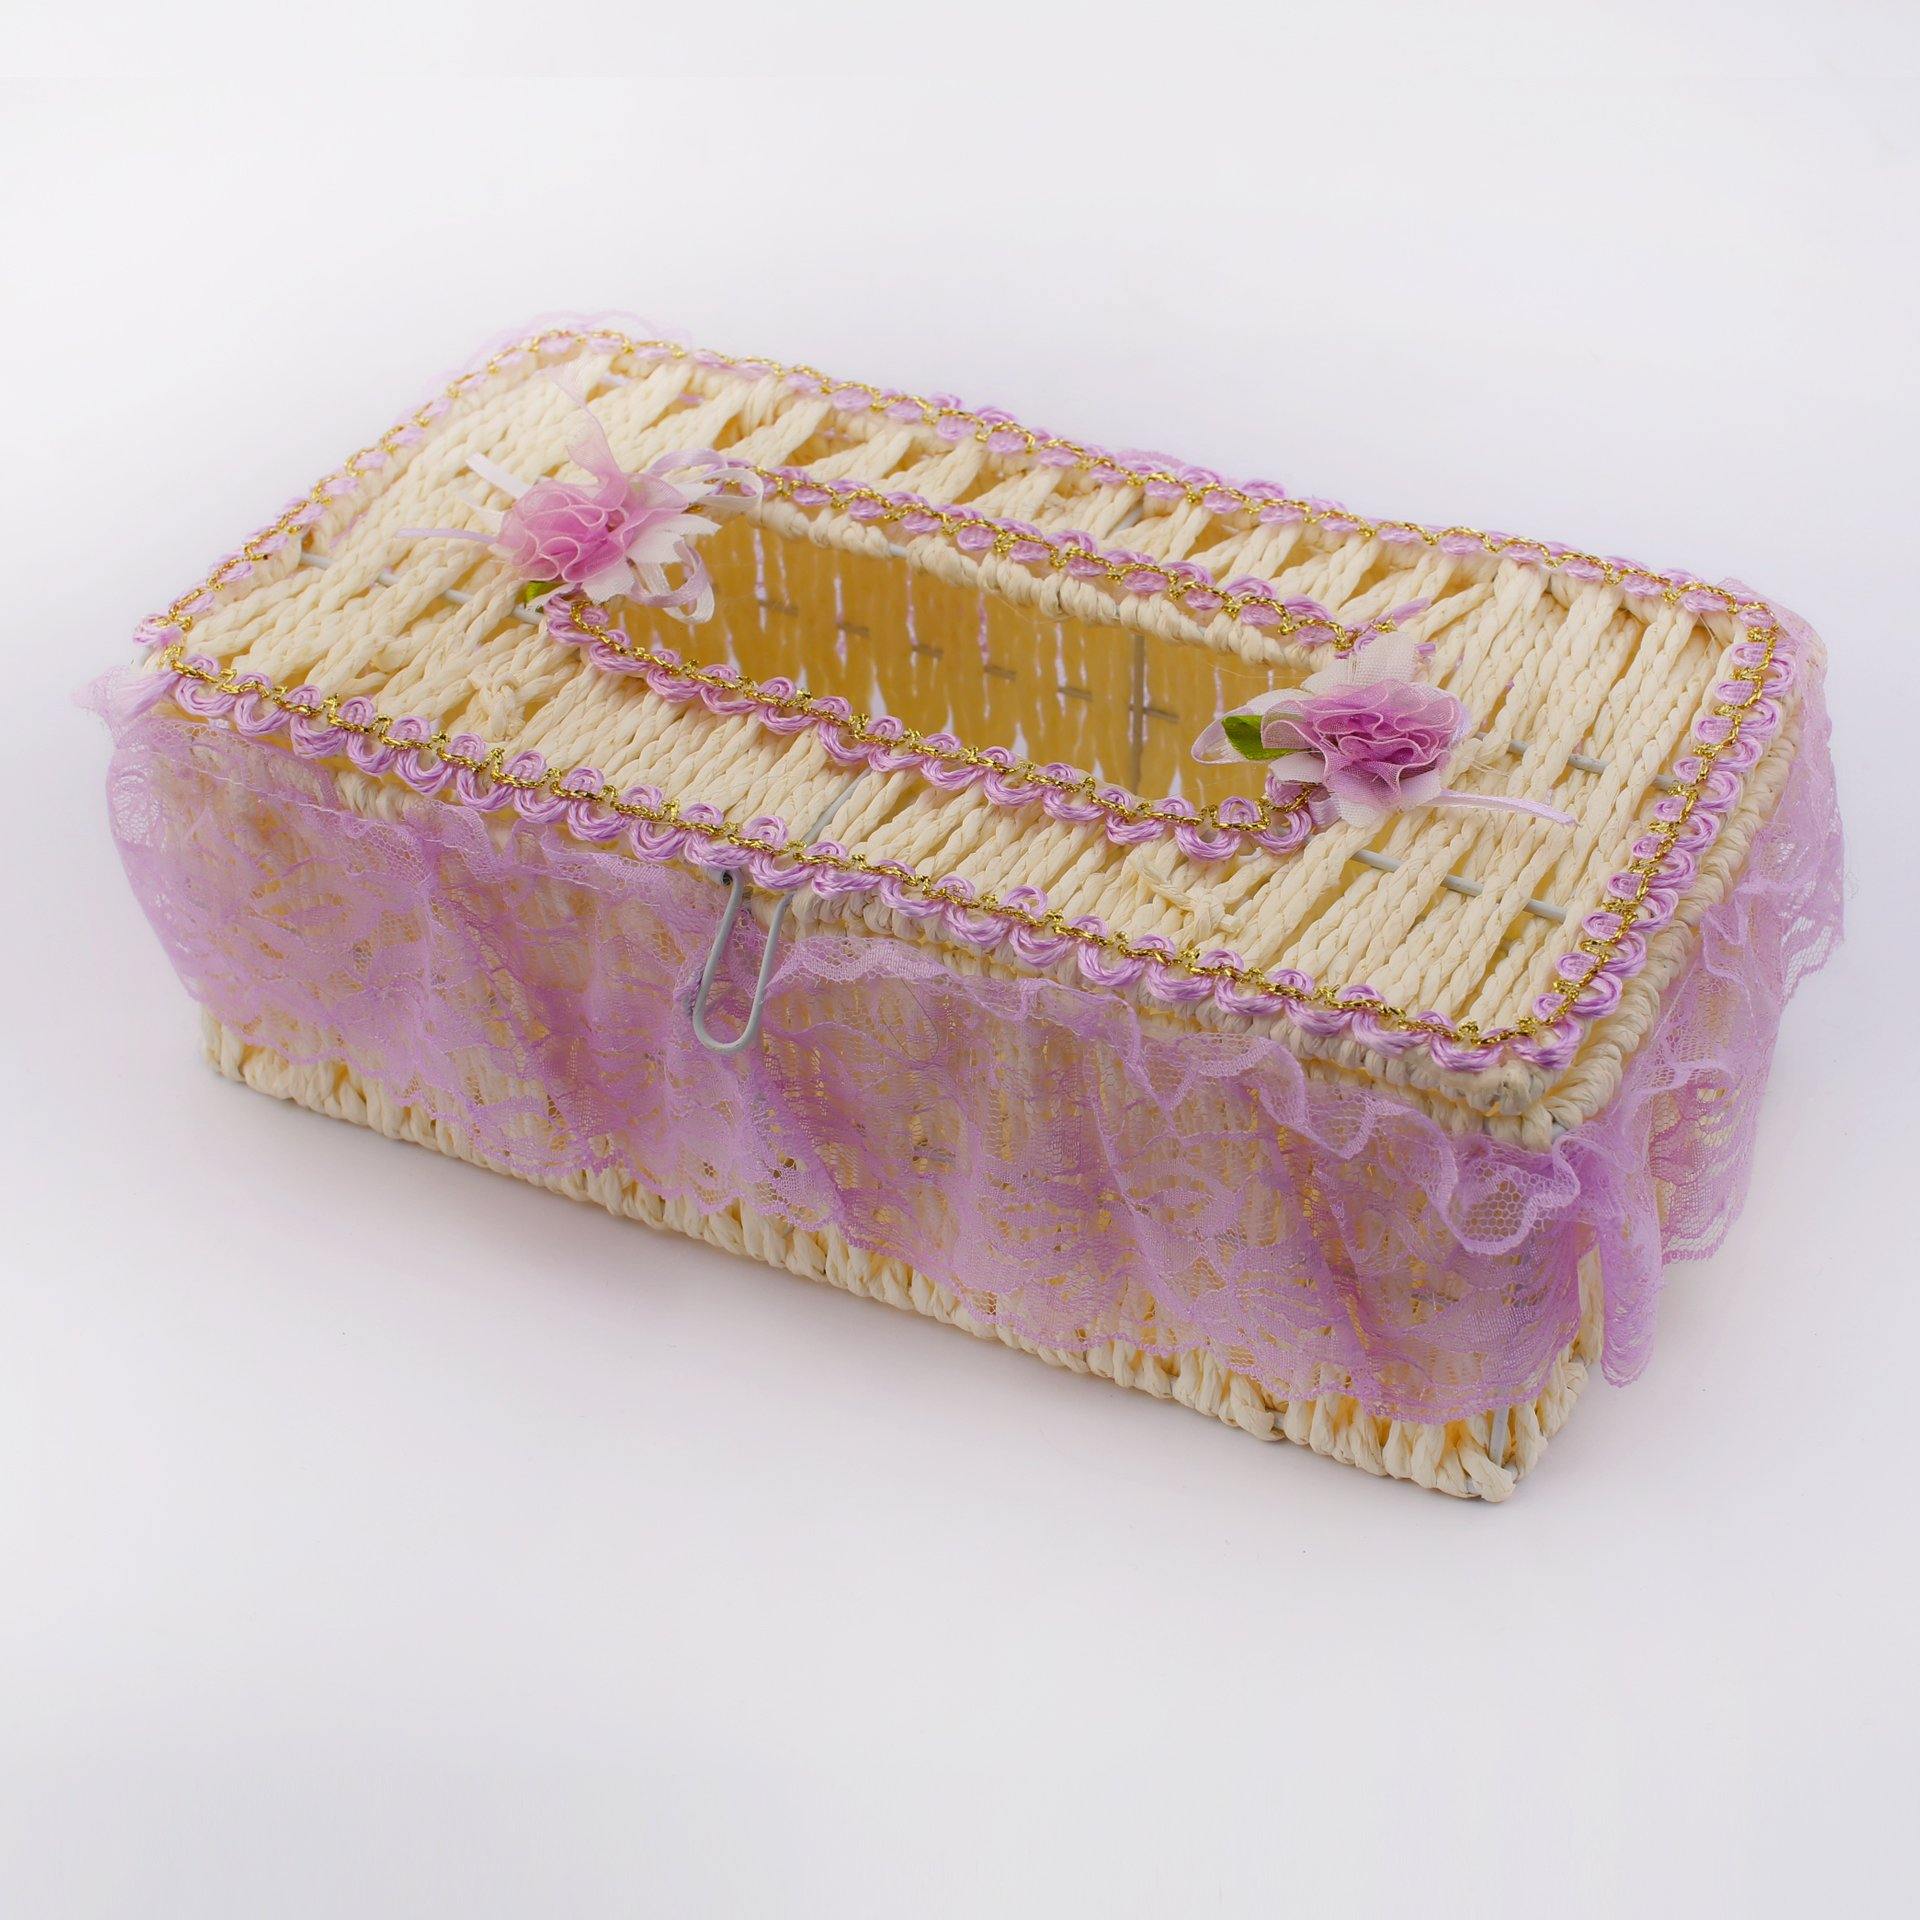 Braided Tissue Box with Fabric Lining Baskets Home Matters Store 